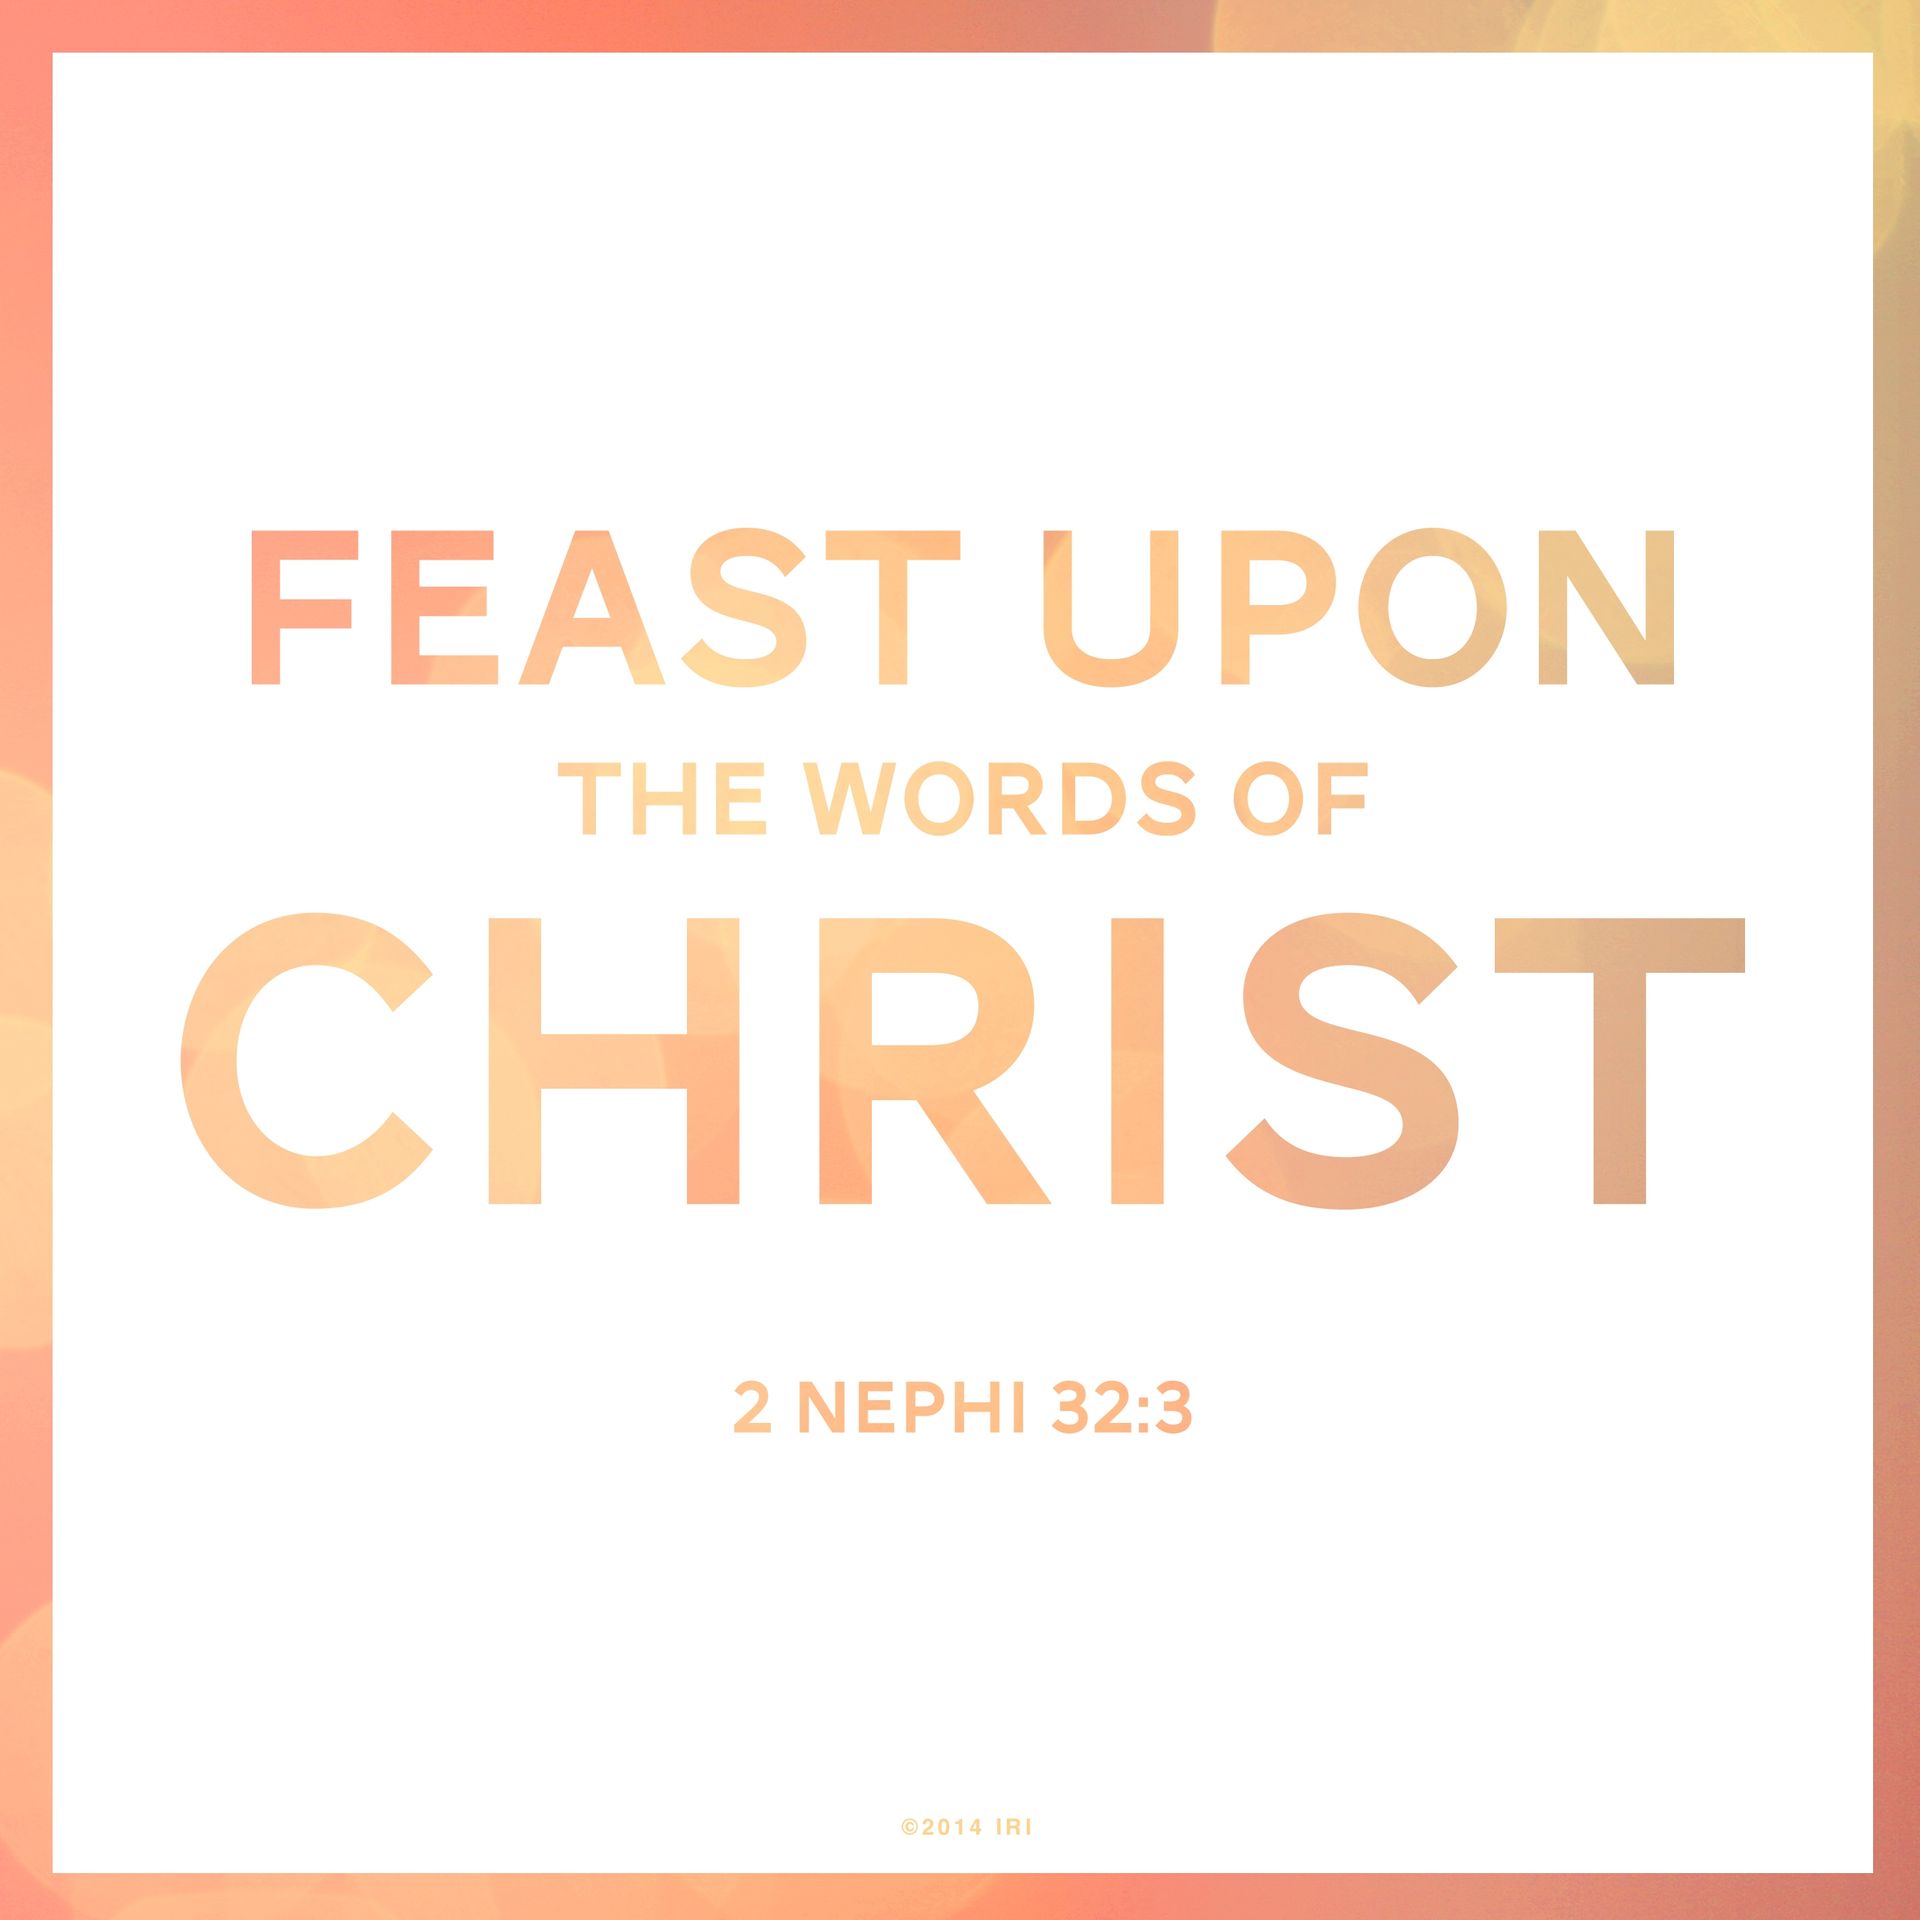 “Feast upon the words of Christ.”—2 Nephi 32:3